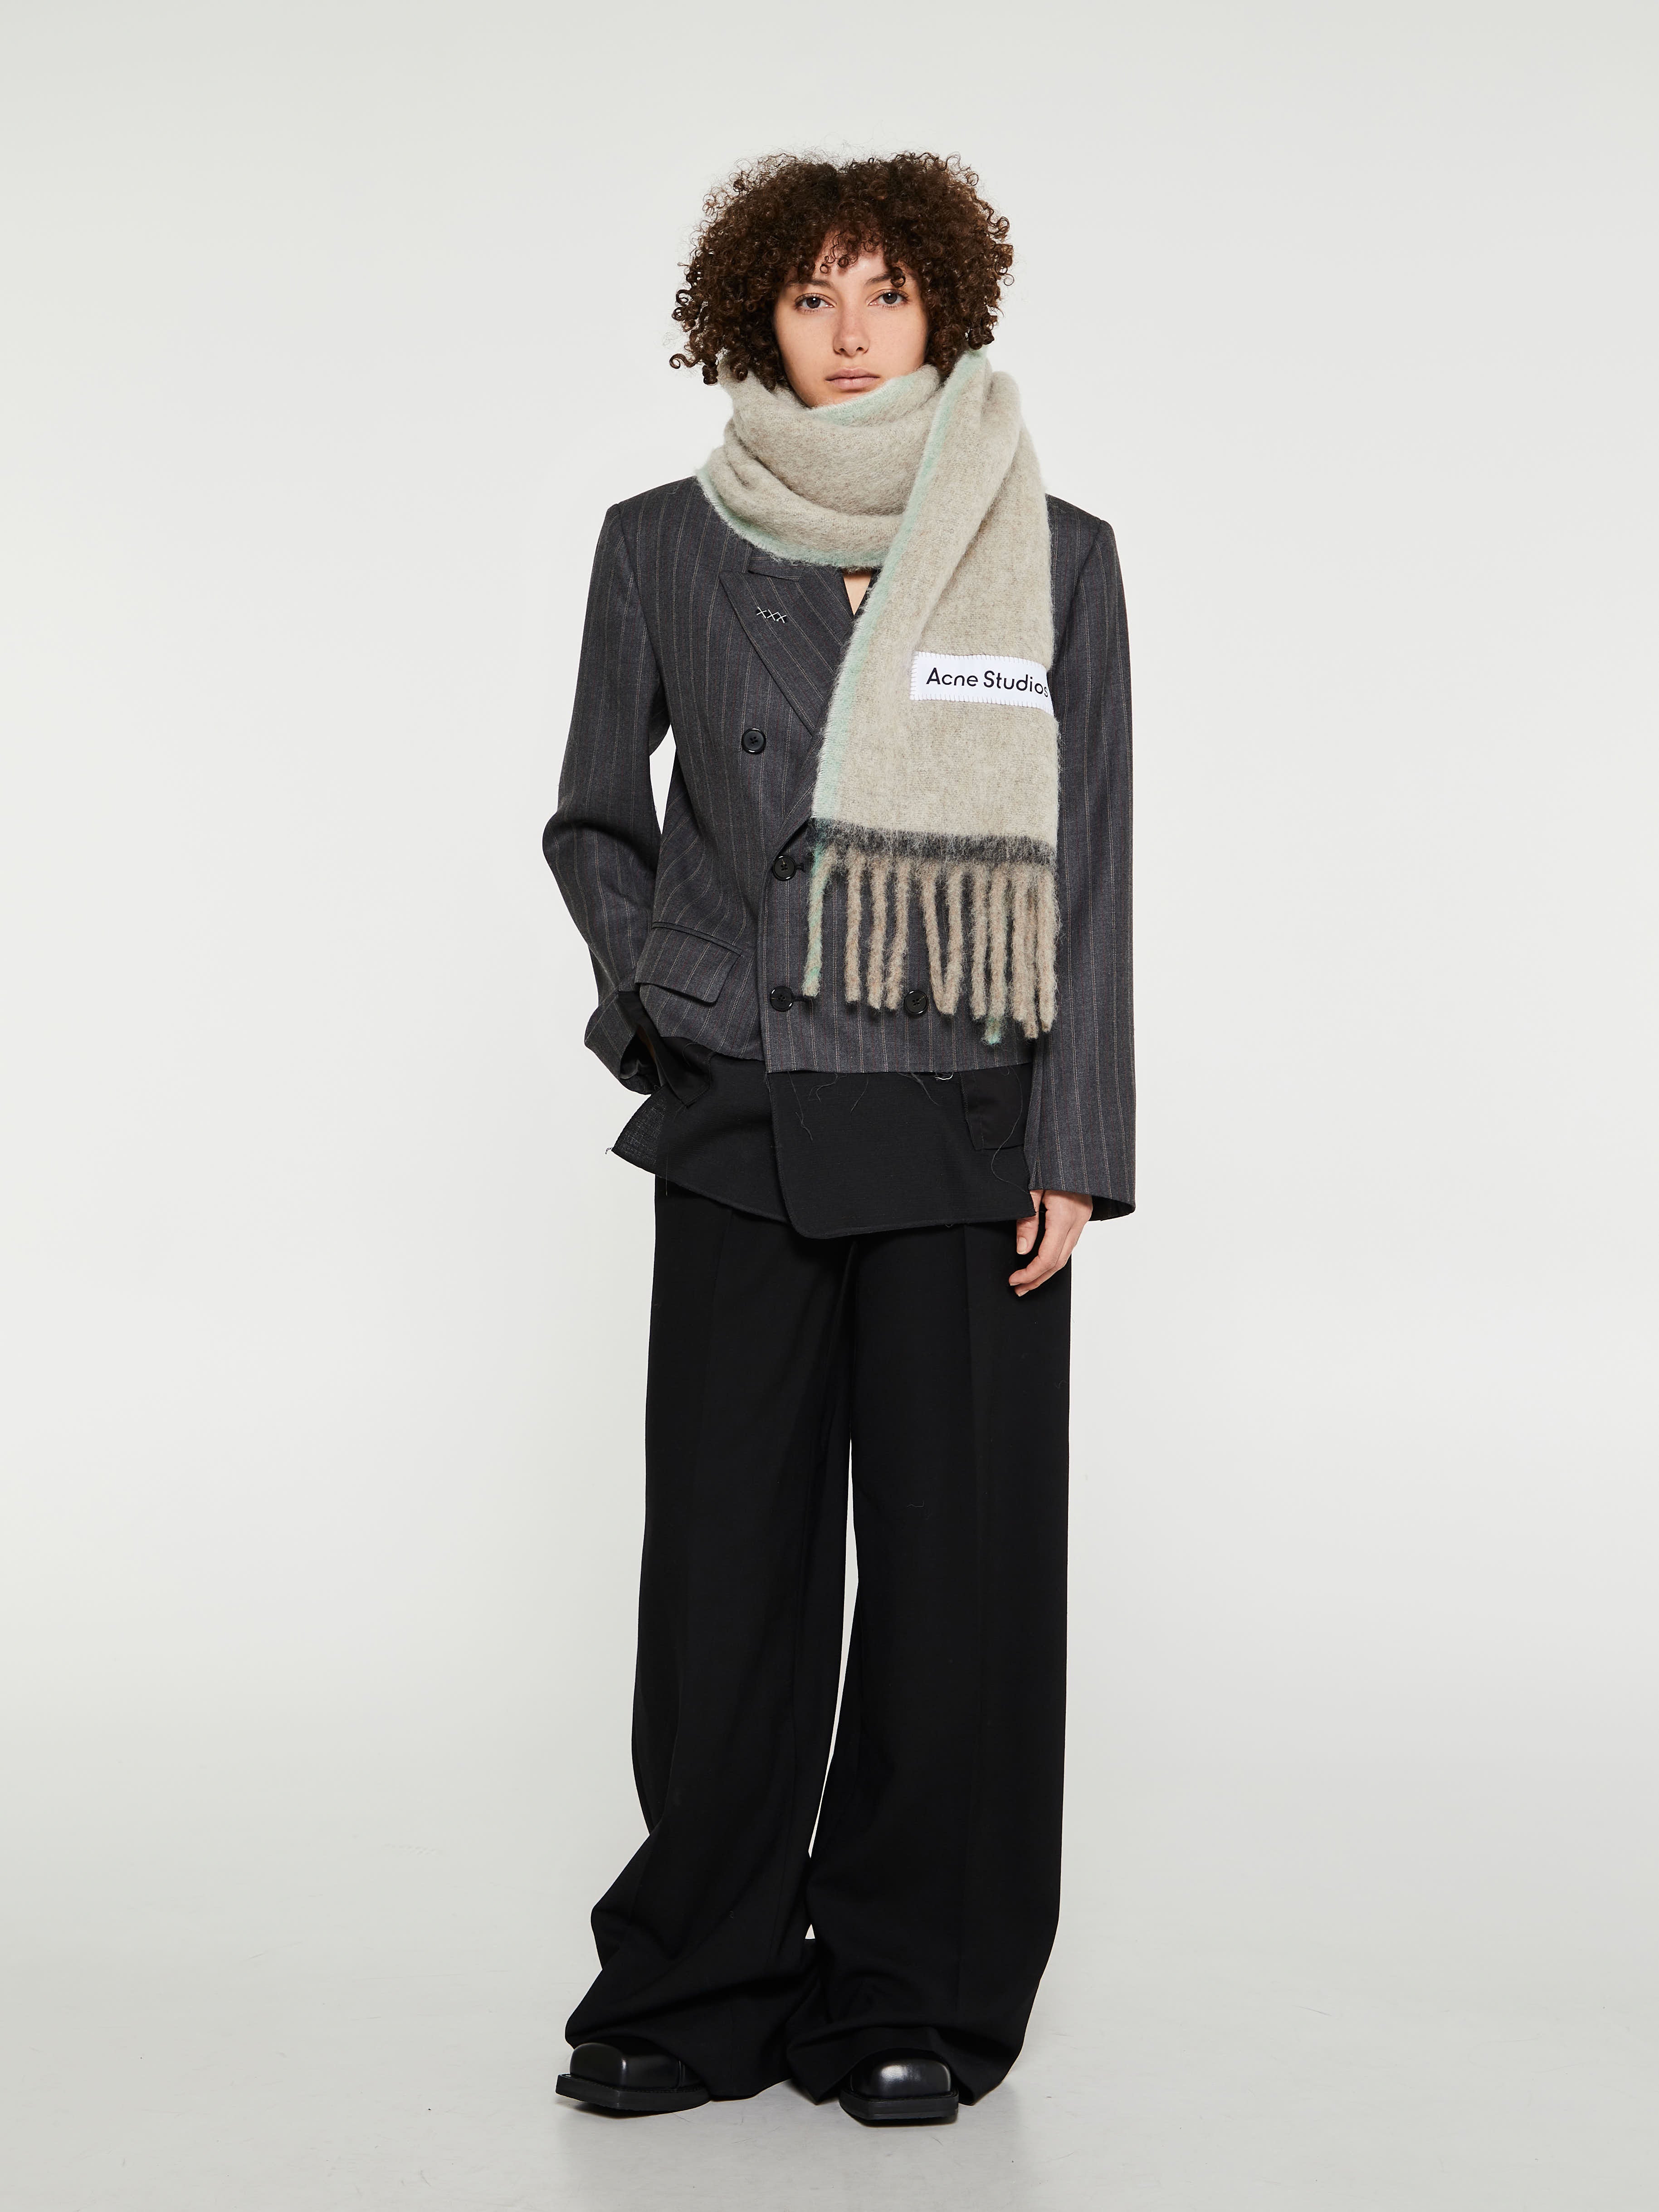 Narrow Fringe Wool Mohair Scarf in Beige and Grey